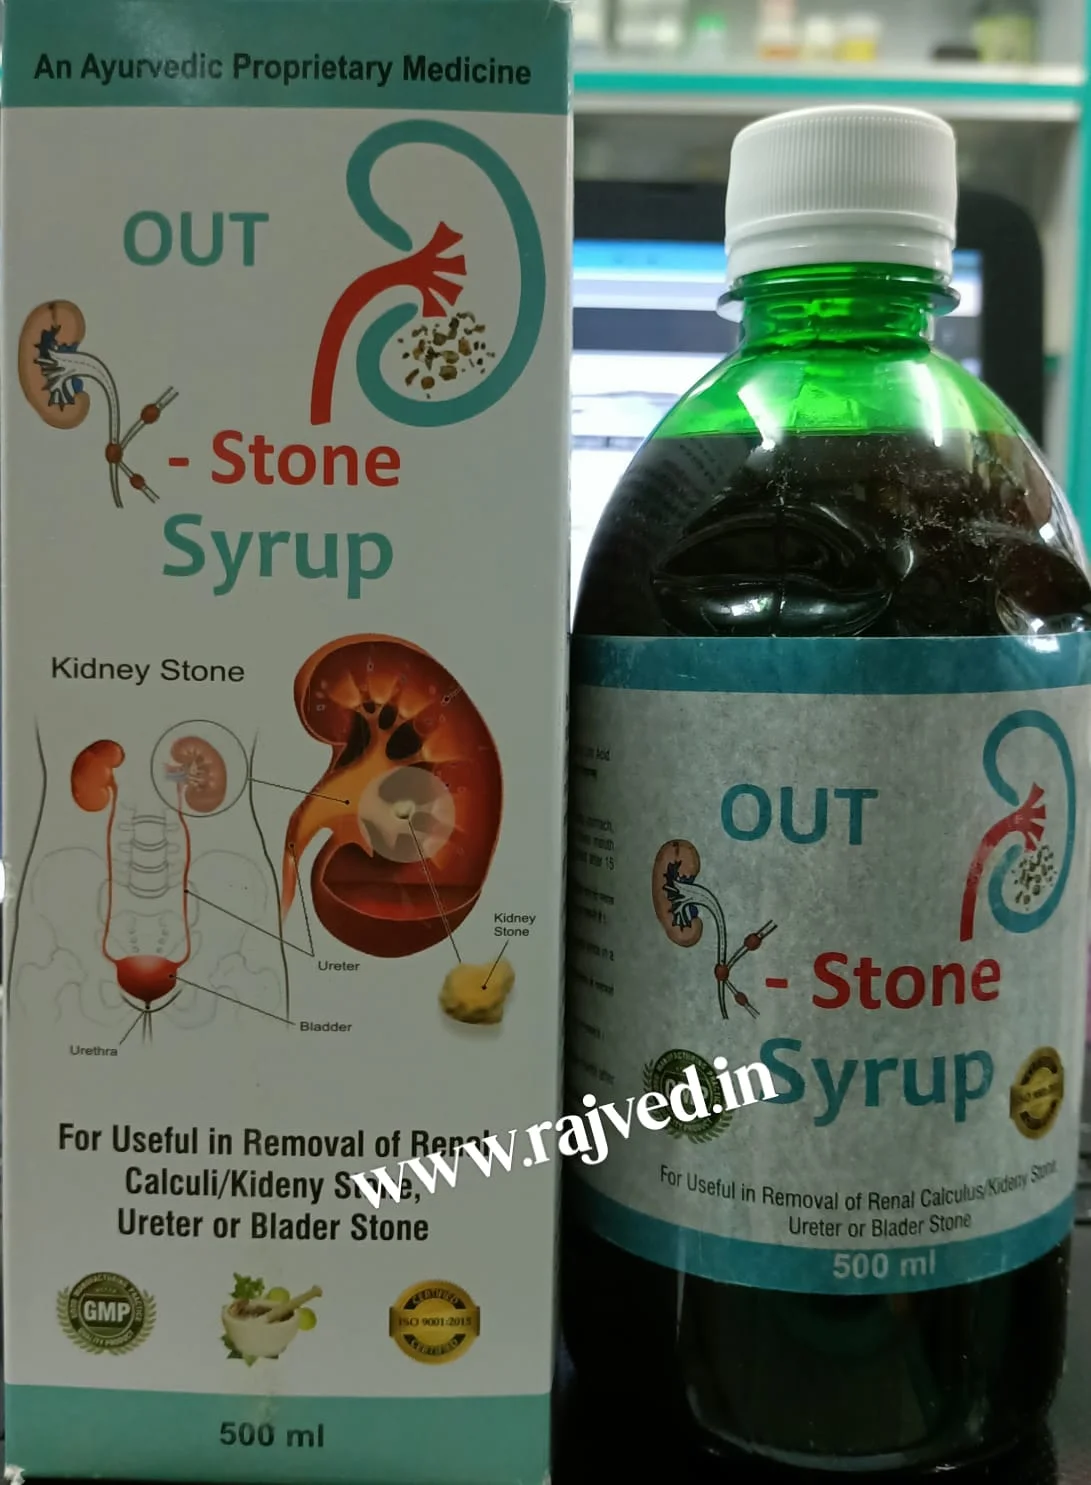 out stone syrup 500ml hitech herbal pharma